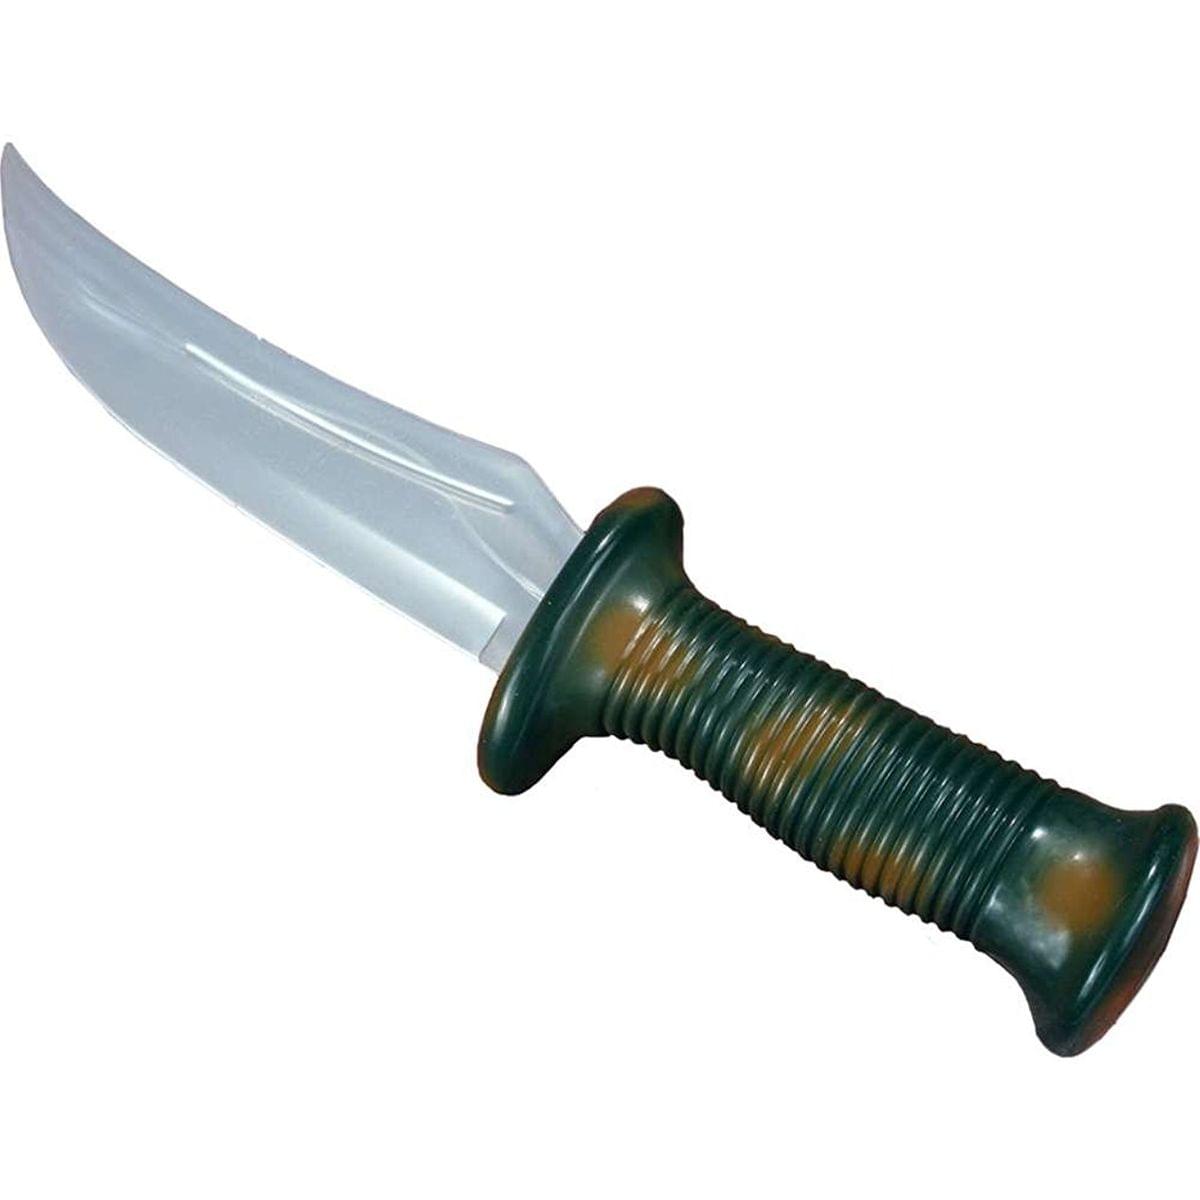 Survival Knife Costume Accessory